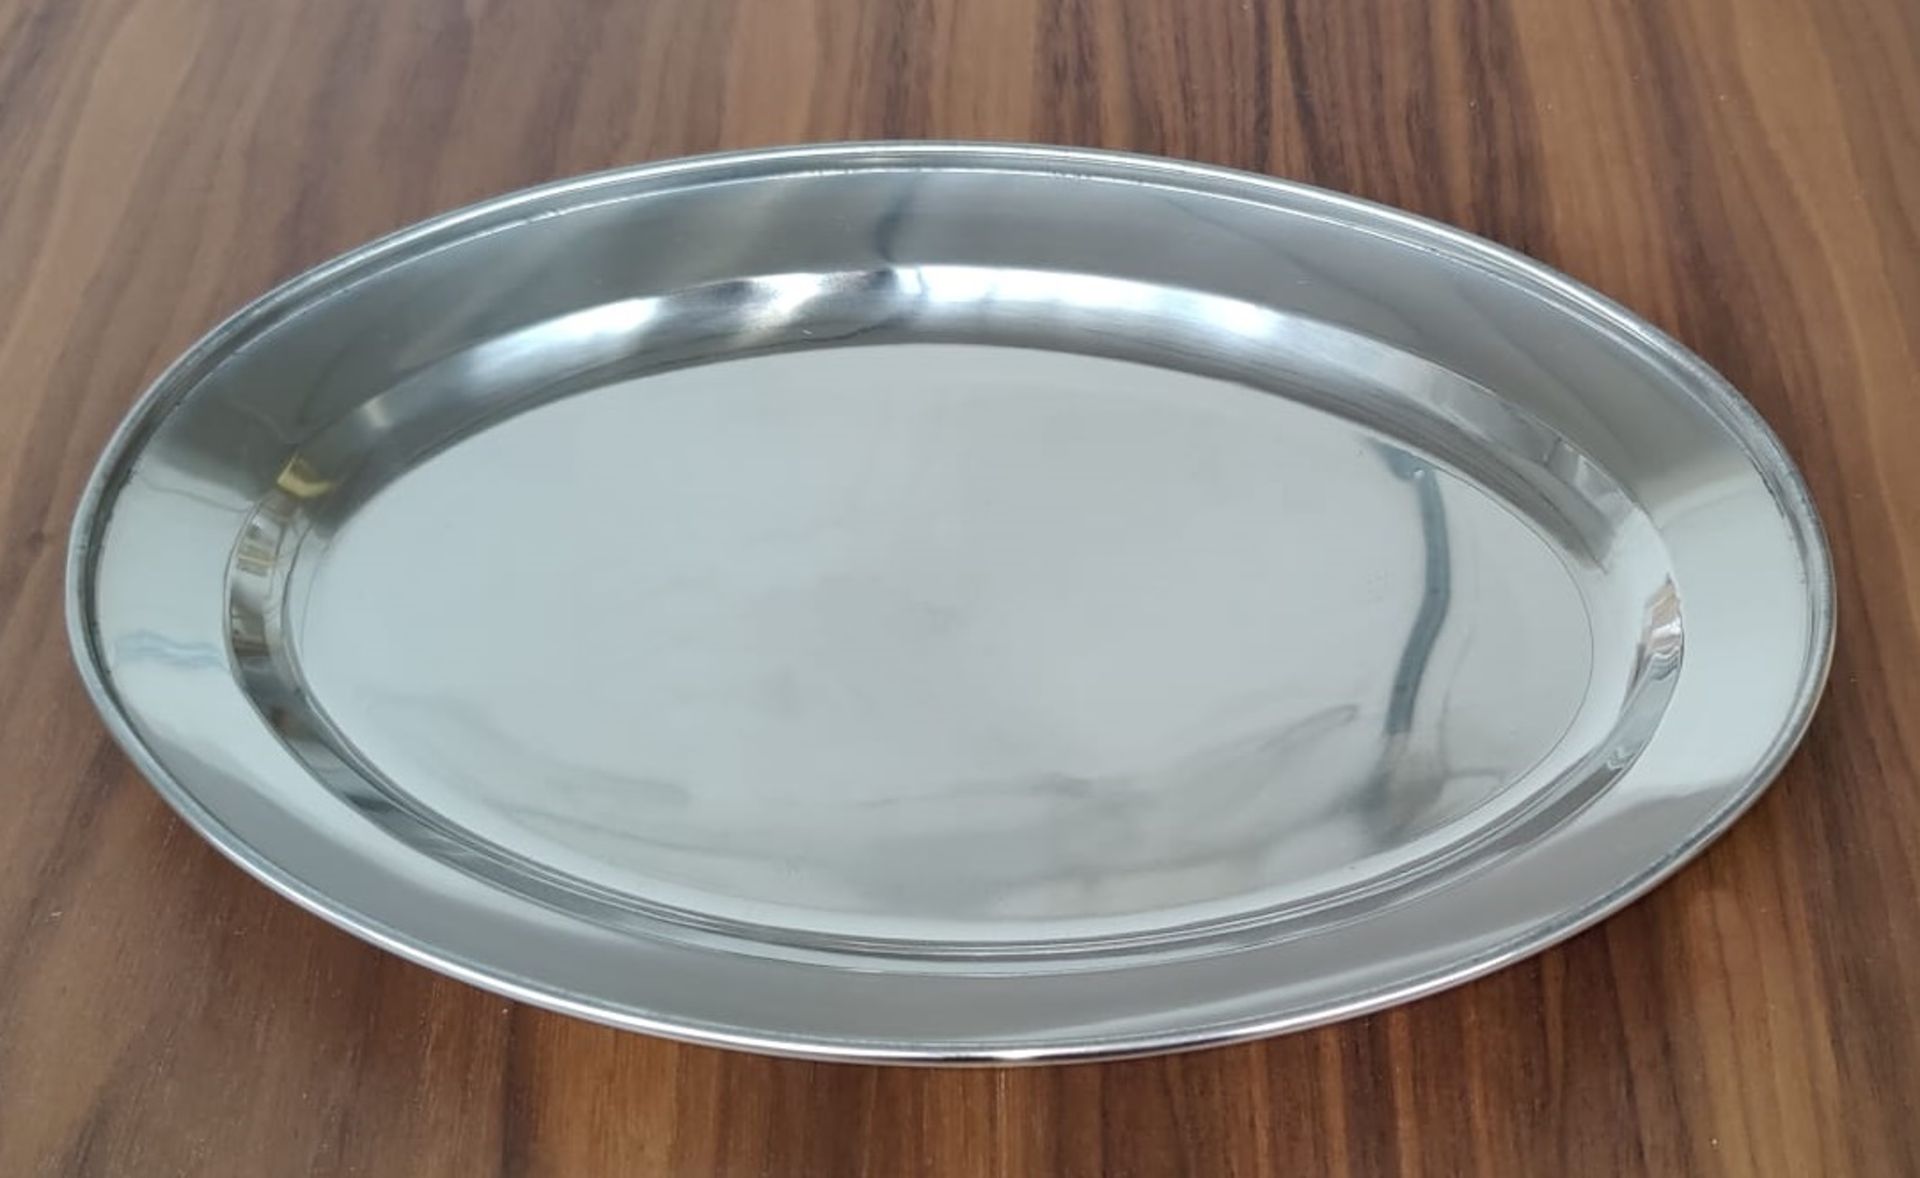 18 x Stainless Steel Small Oval Service Trays - Size: 255mm x 180mm - Brand New Boxed Stock RRP £90 - Image 7 of 8